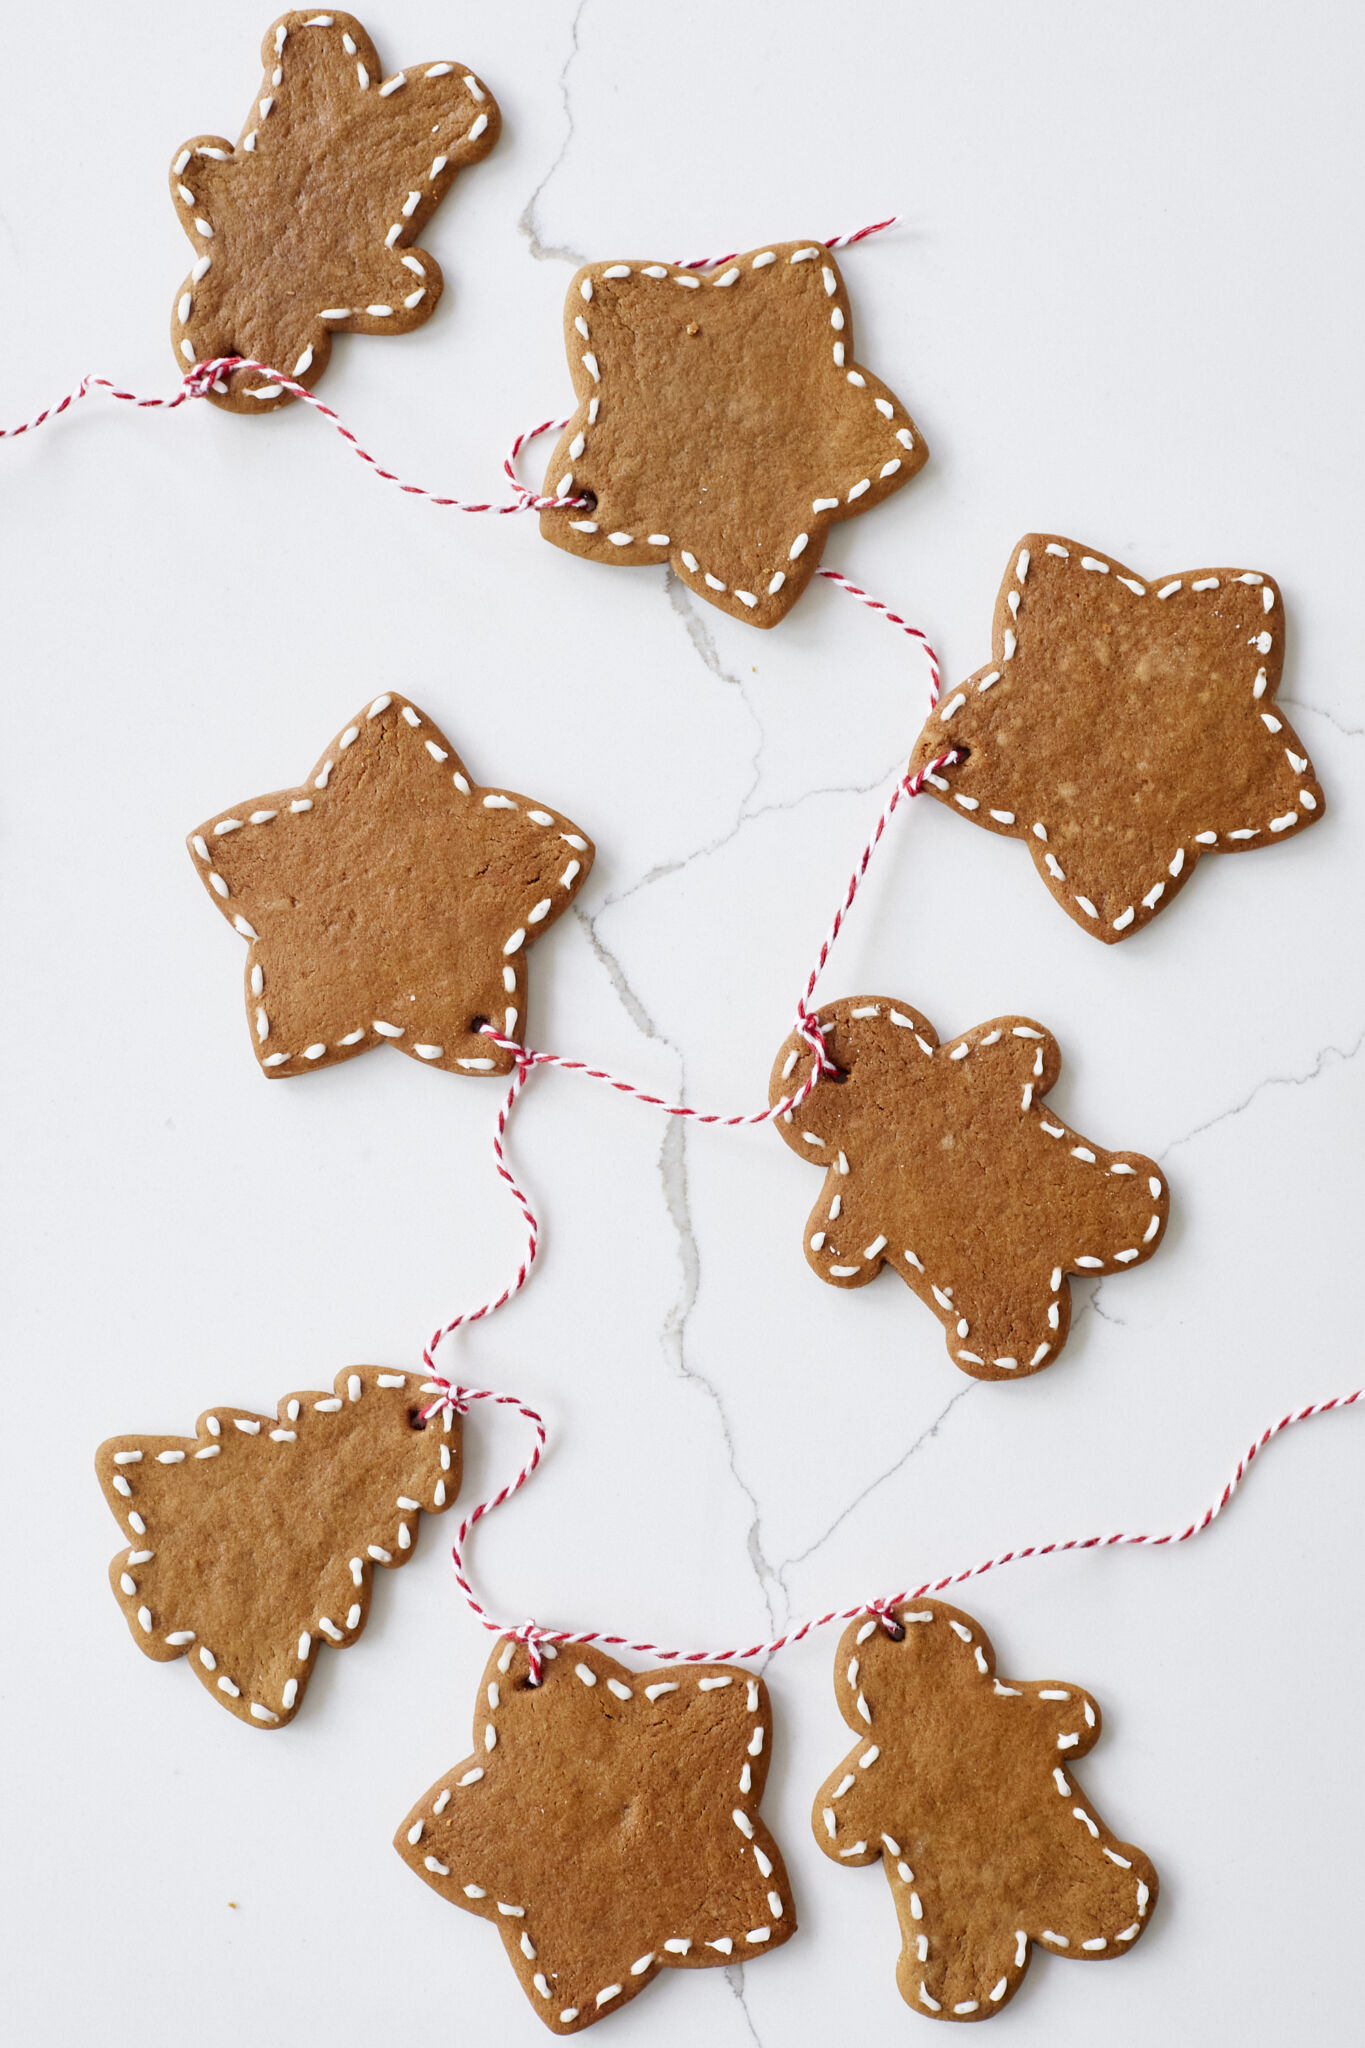 Gingerbread Cookies are baked until brown and iced with white icing on the edges. They're strung together with a red-white twine.